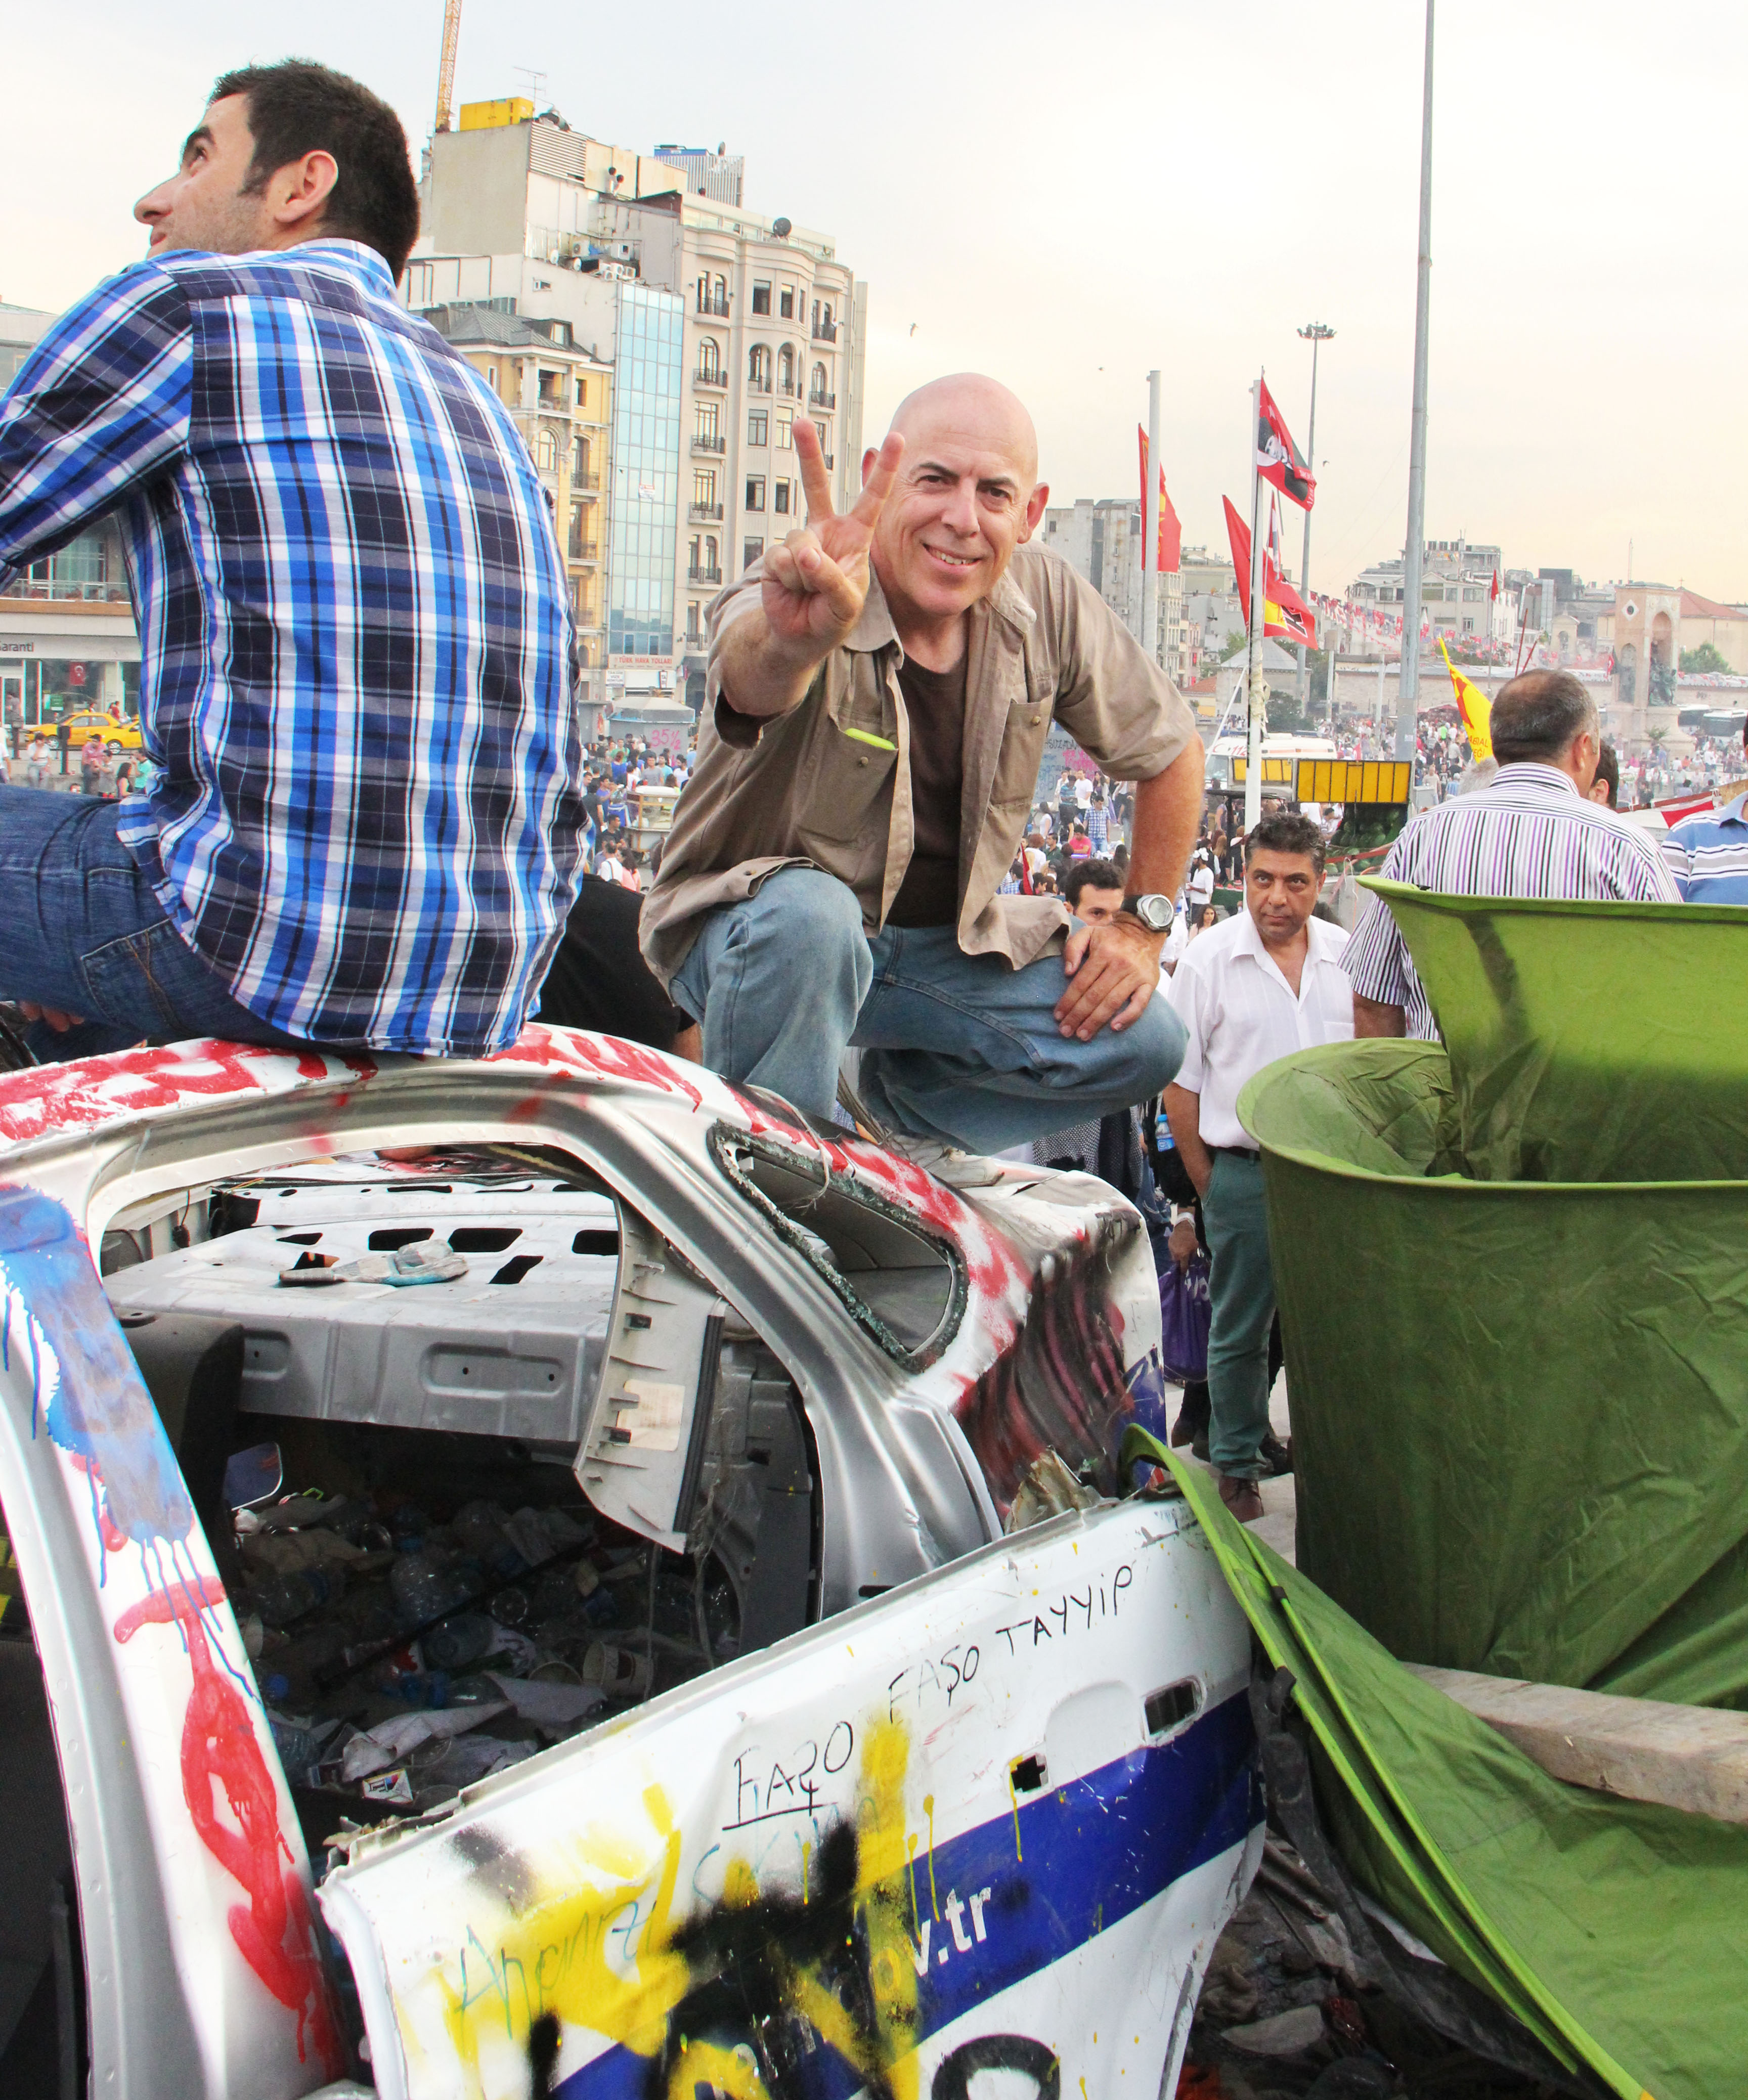 Preaching peace from the top of a police car in Taksim Square, Istanbul, June 15, 2013. Glenn photographed the protests and police crackdown. (See his Facebook page.)